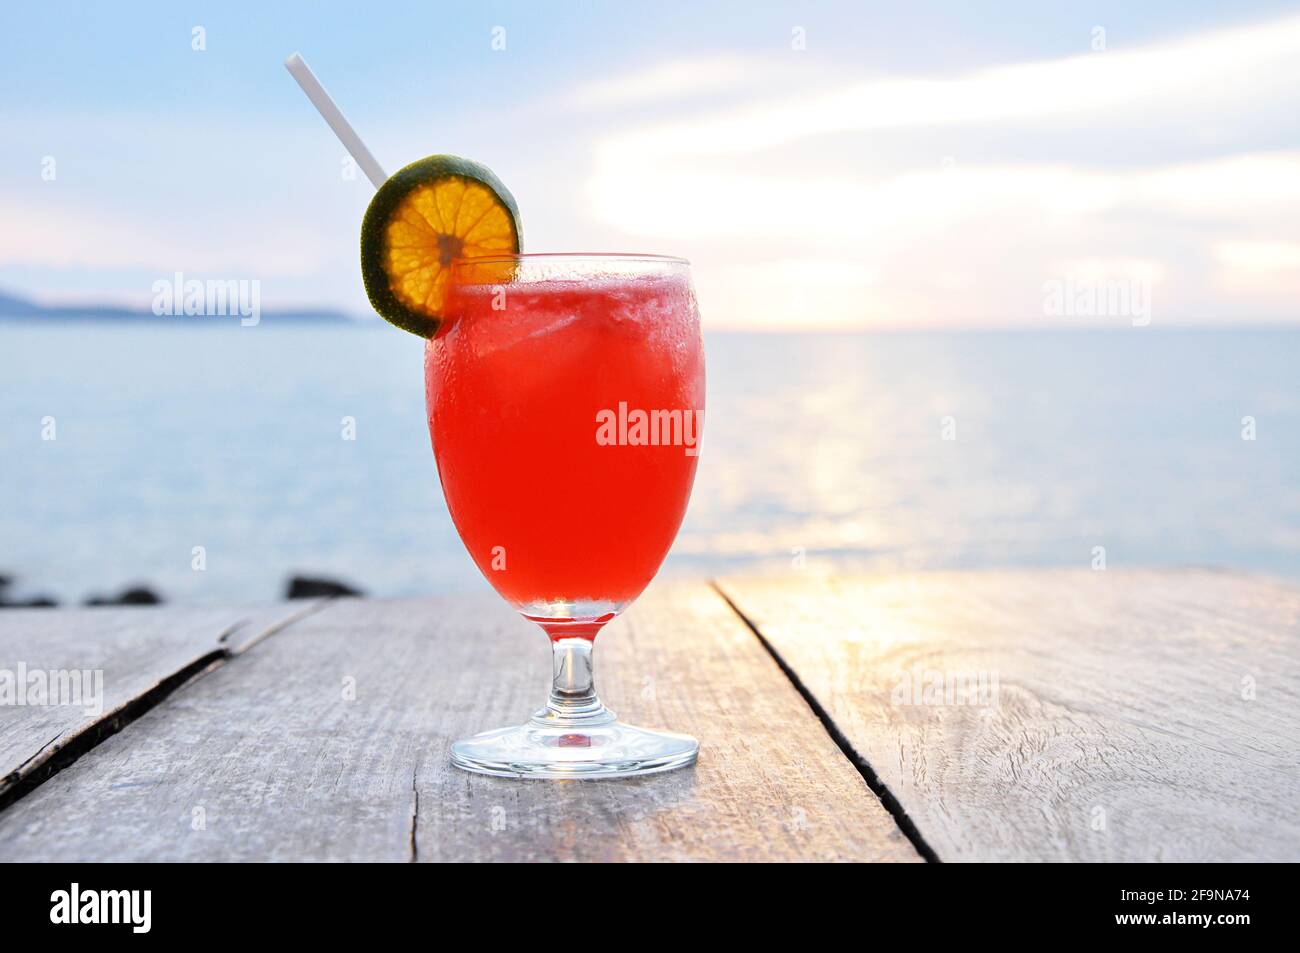 Cocktail drink with orange slice as a garnish on old wooden table & sea water background Stock Photo